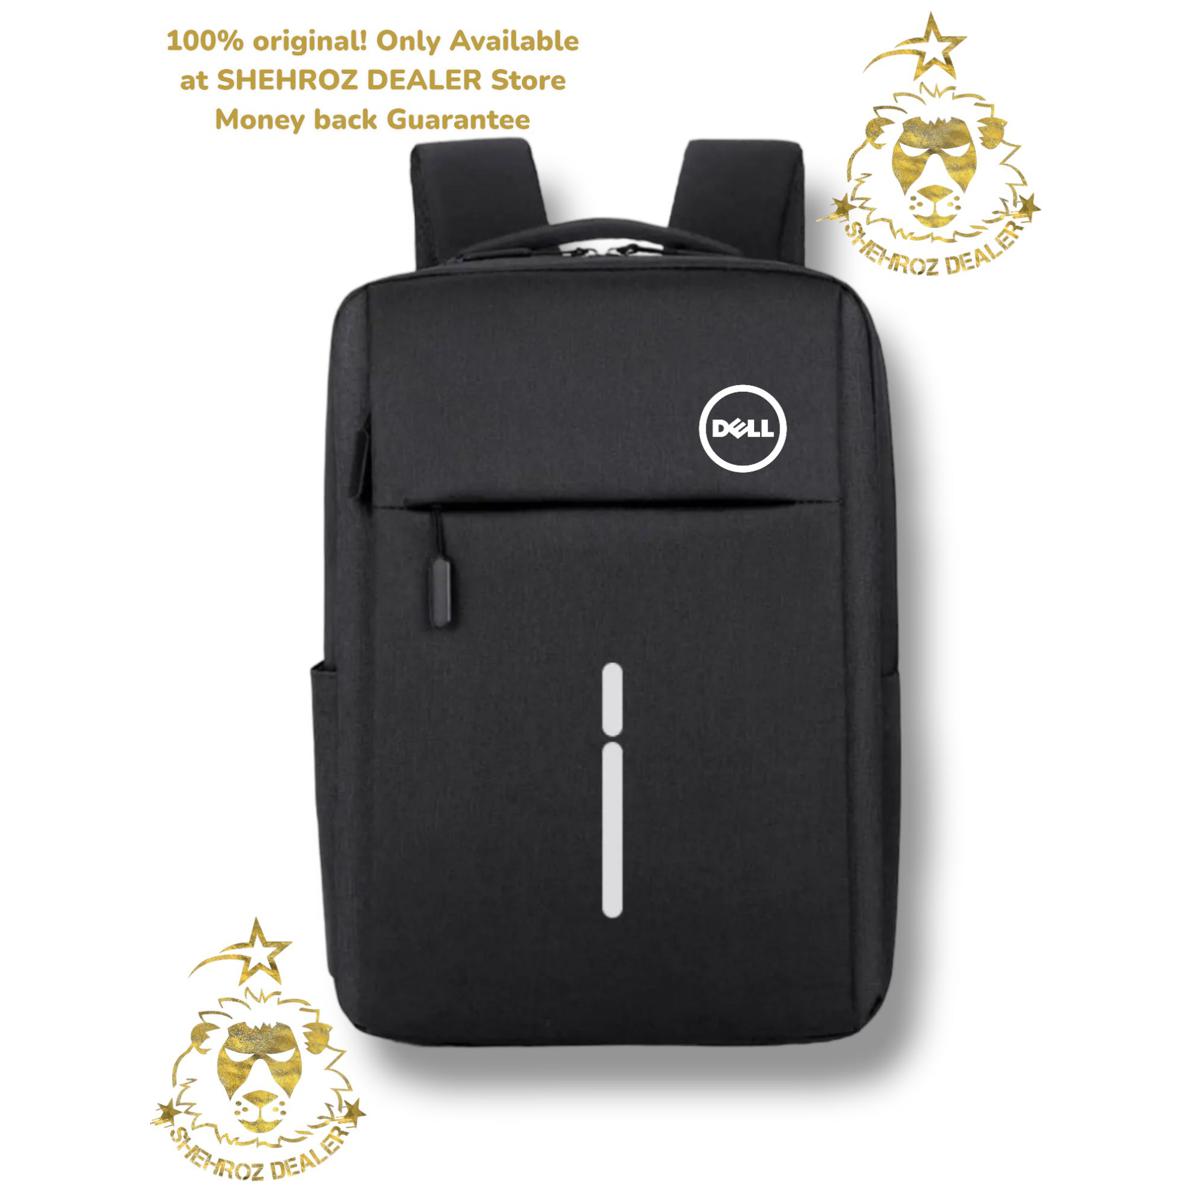 Dell labtop bags - Computers & Accessories - 1067994444